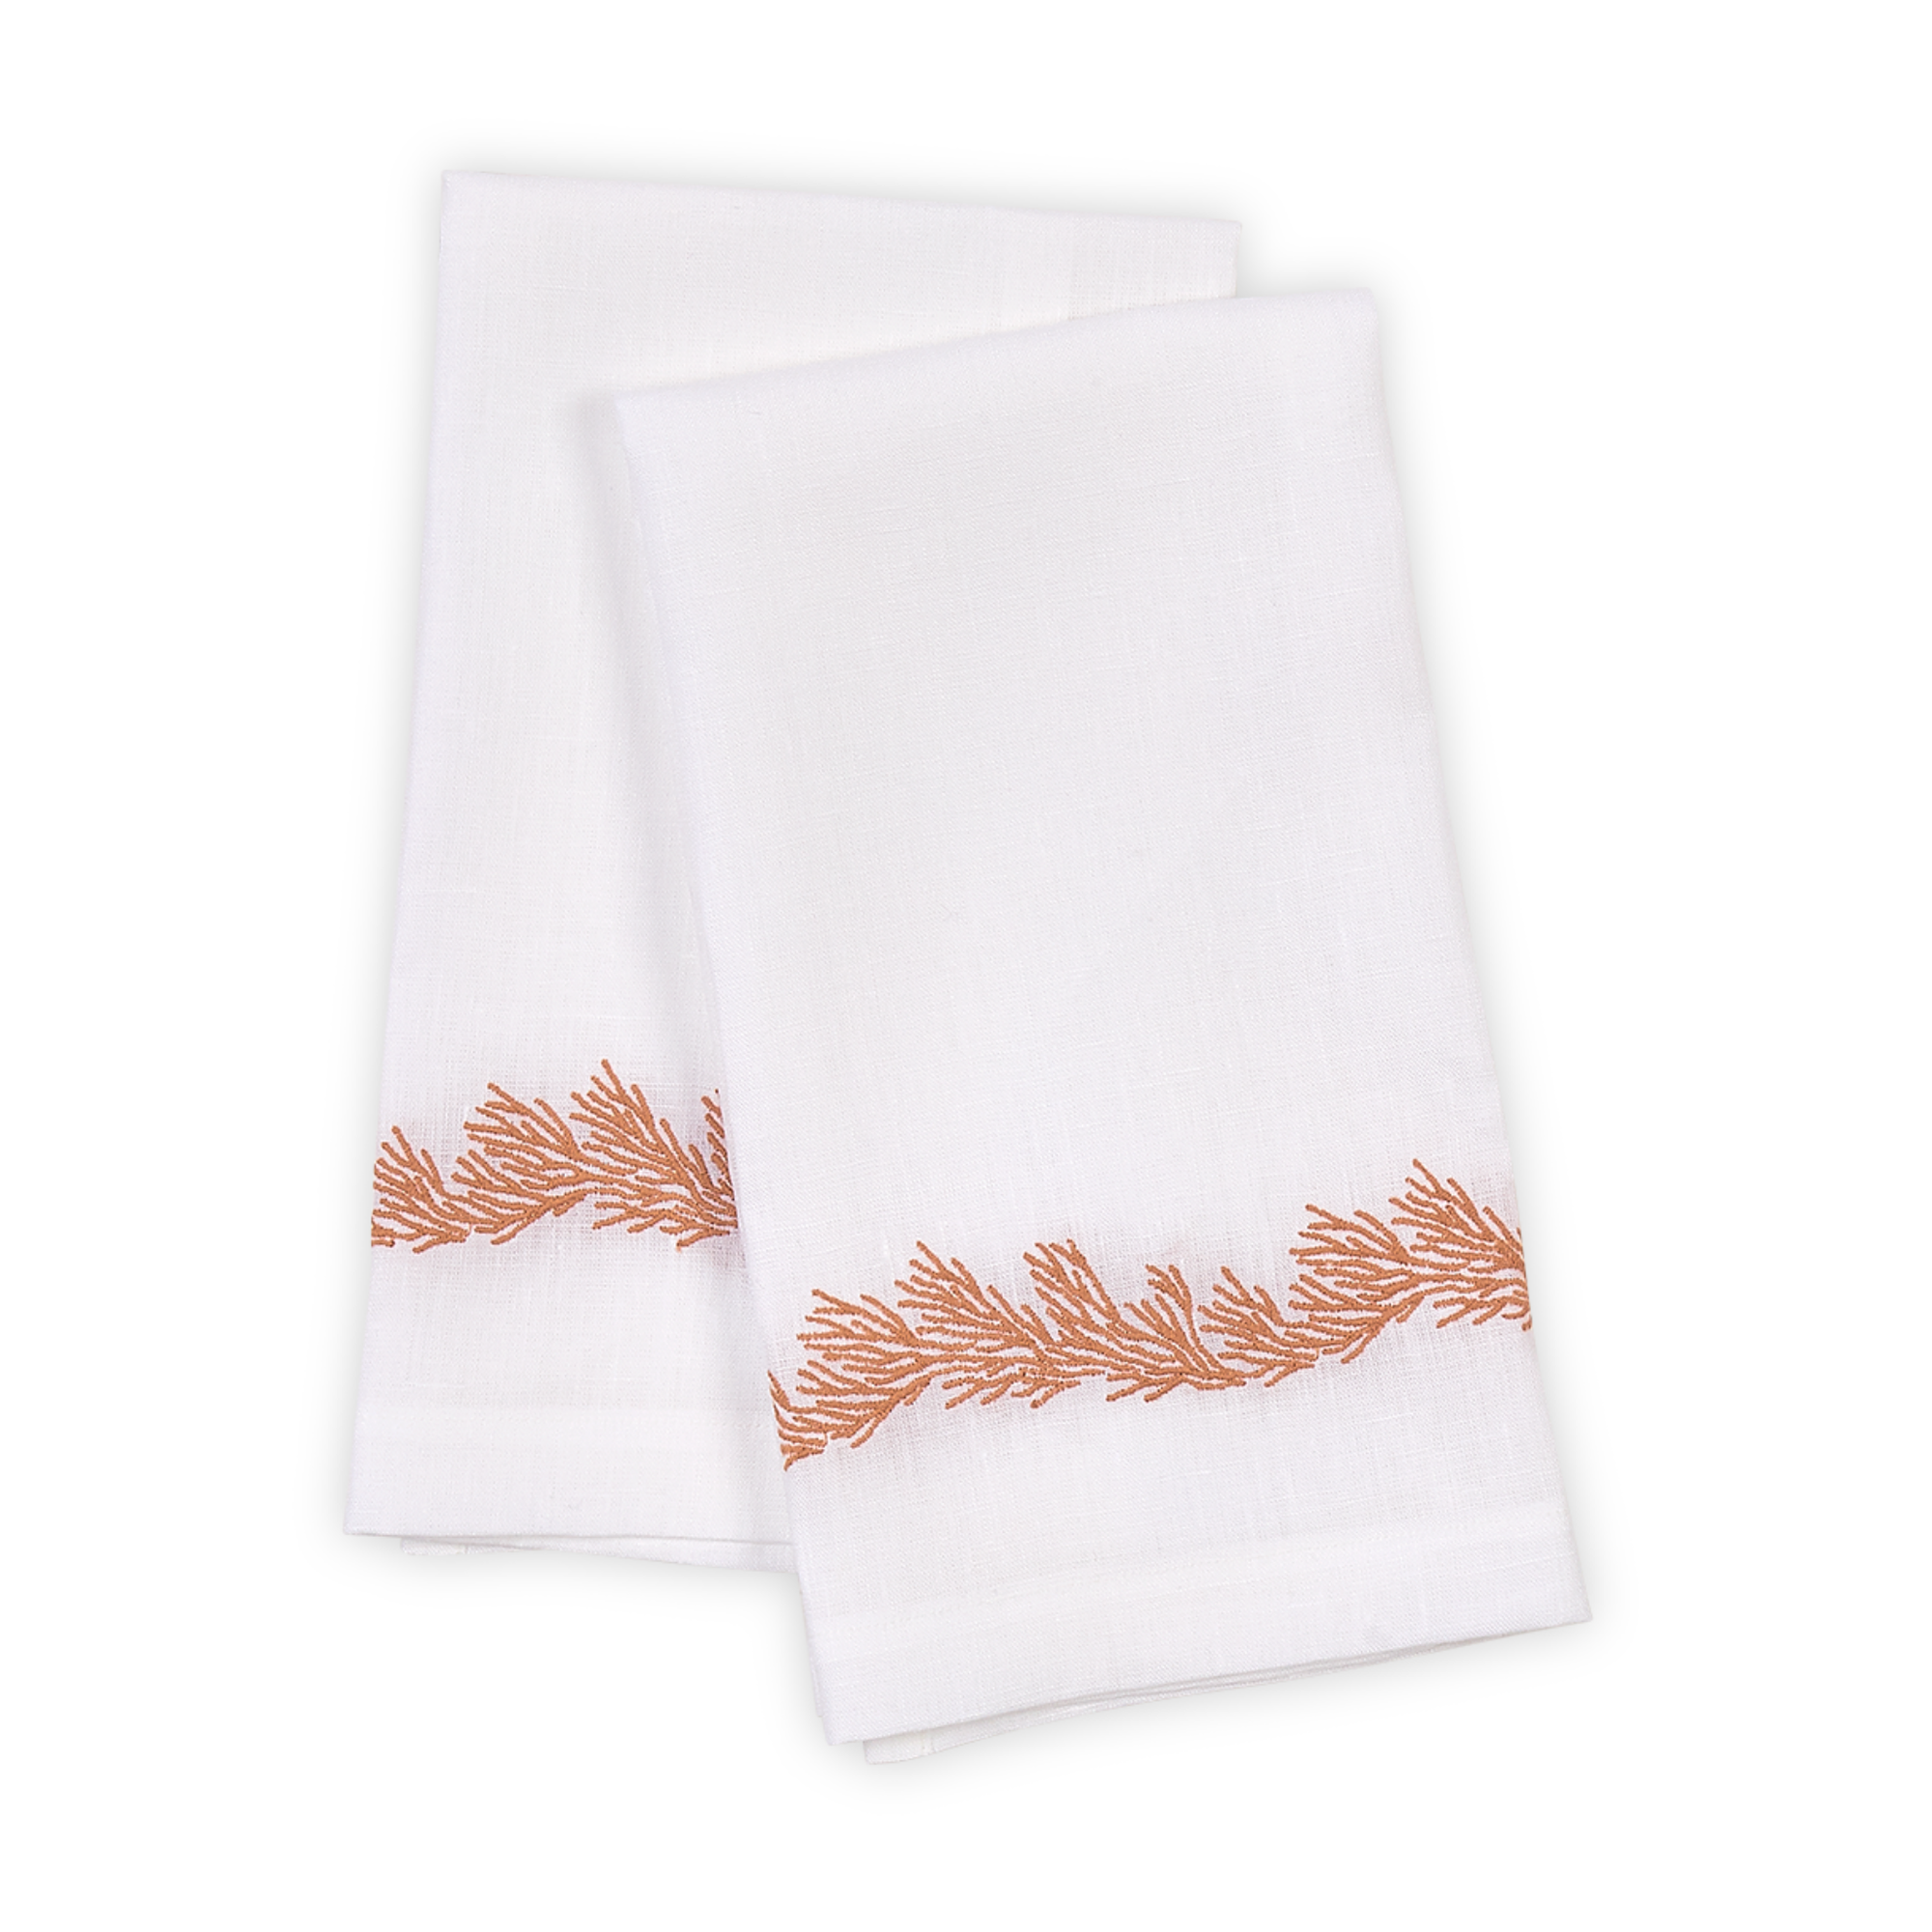 Set of 2 Folded Matouk Atoll Guest Towels in Copper Color